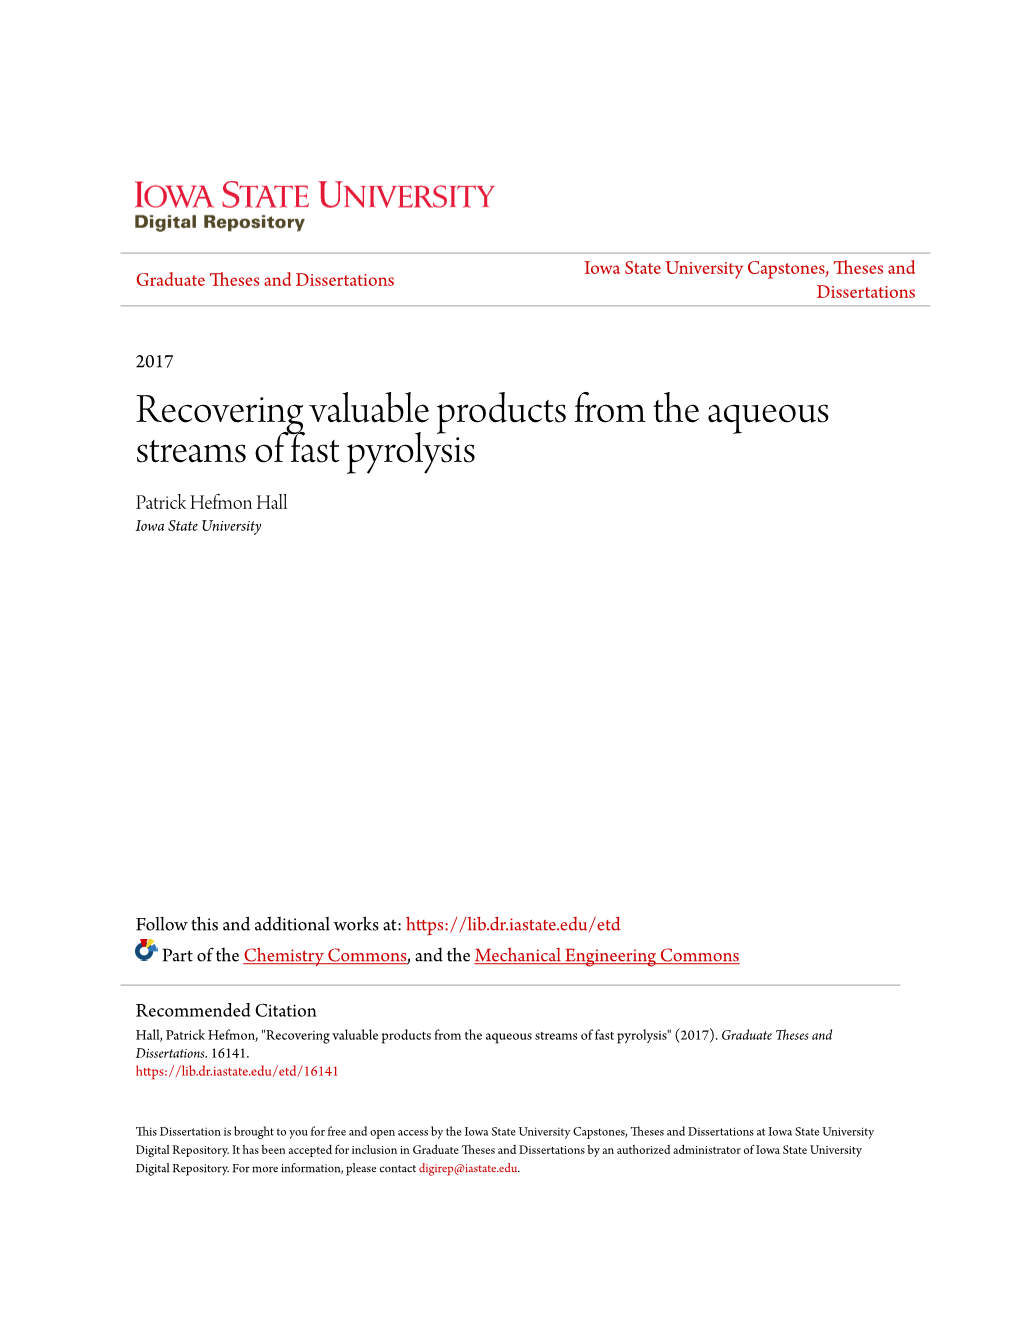 Recovering Valuable Products from the Aqueous Streams of Fast Pyrolysis Patrick Hefmon Hall Iowa State University